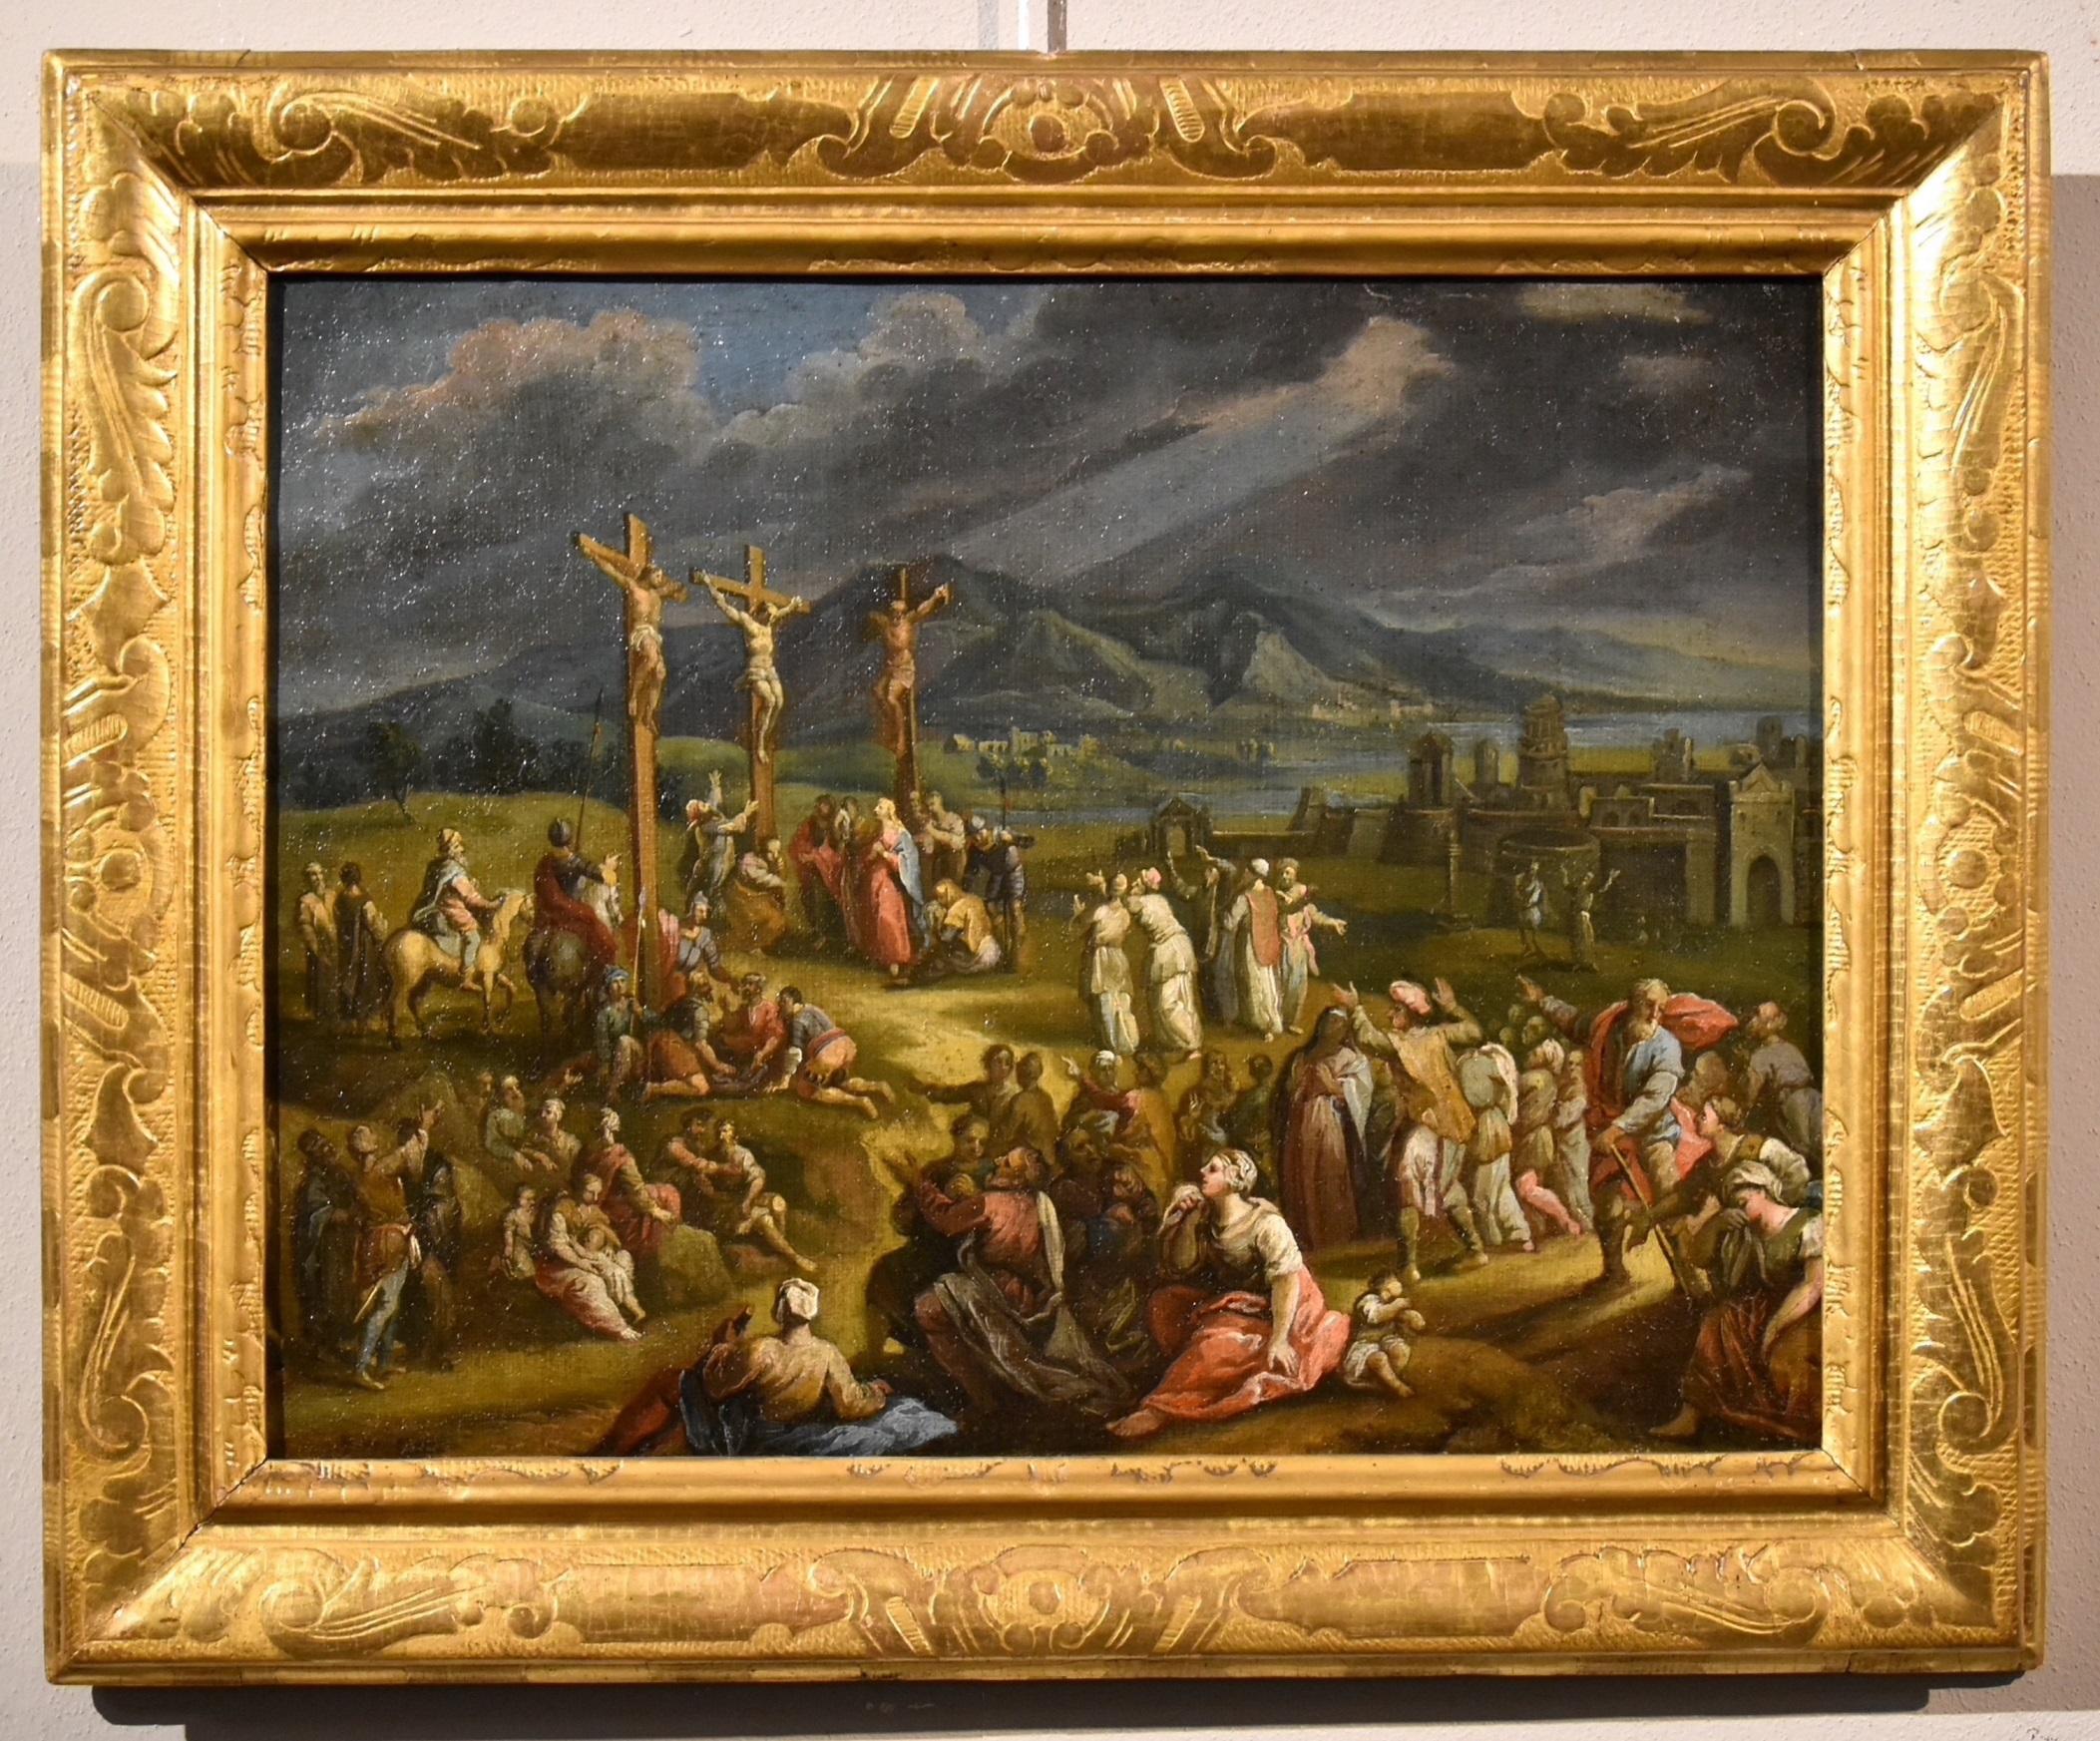 Landscape Crucifixion Christ Paint Oil on canvas Old master 17th Century  - Painting by Scipione Compagni, or Compagno (Naples, about 1624 - after 1680)